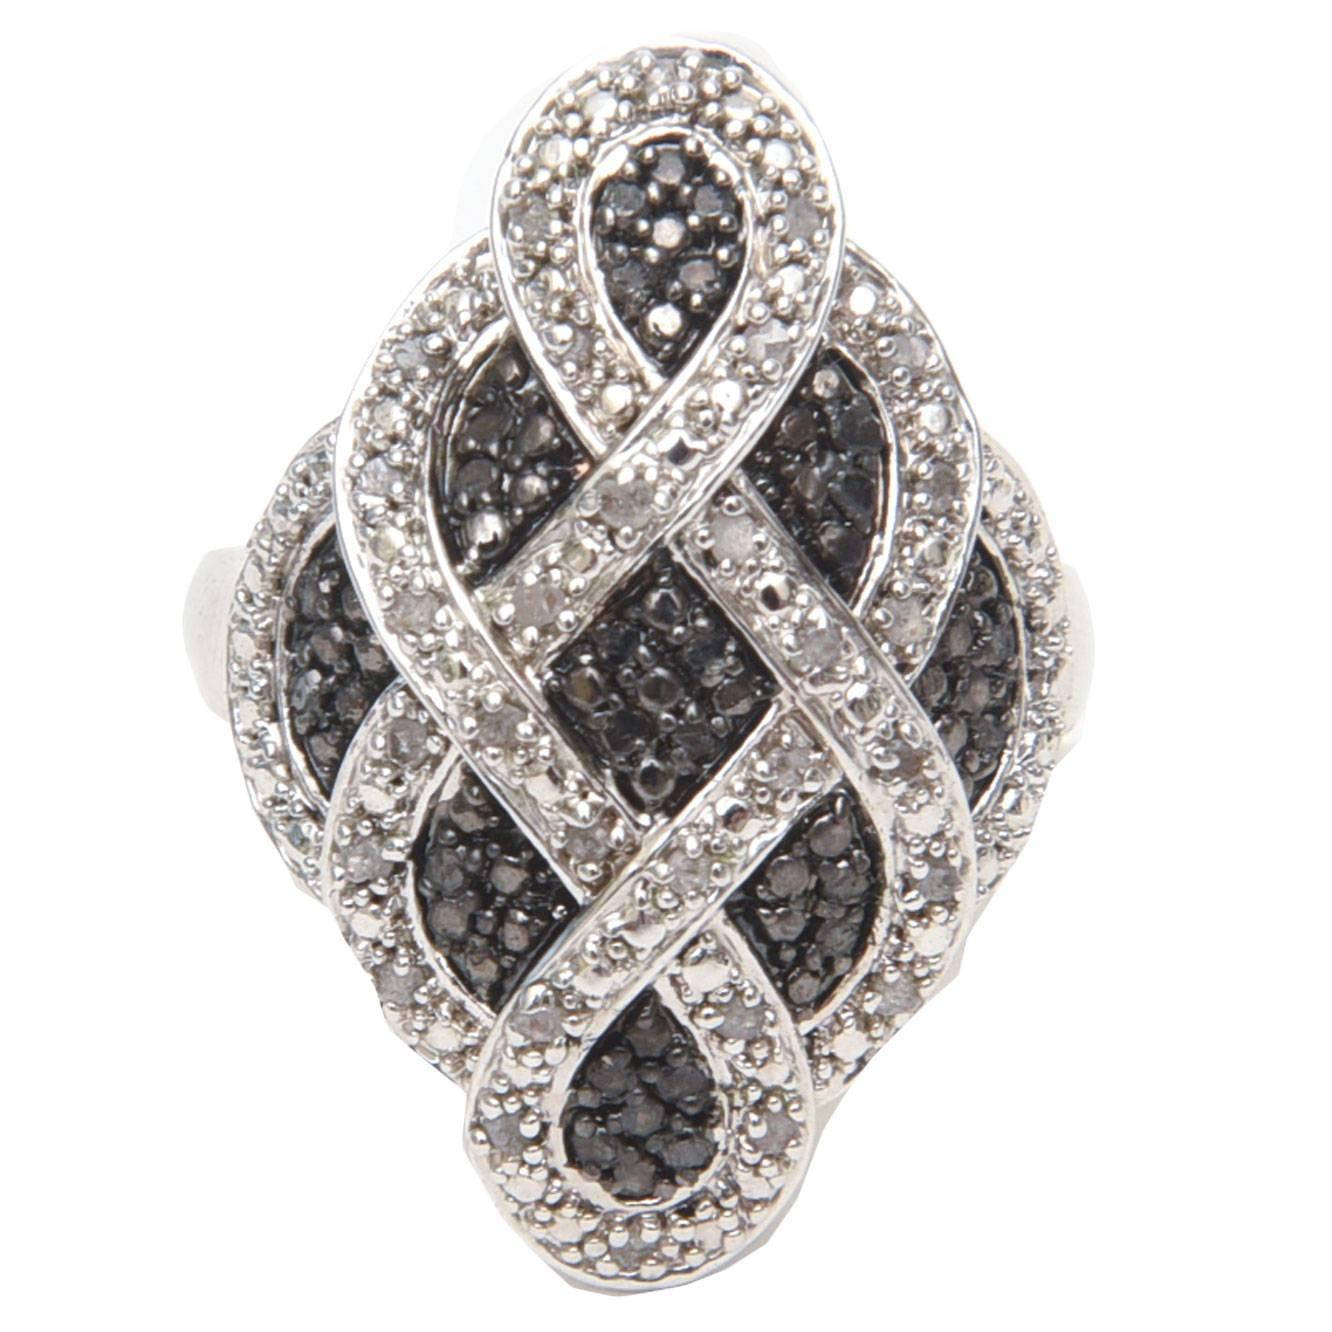  Criss Cross Combination of White and Black Diamonds & Sterling Silver Ring